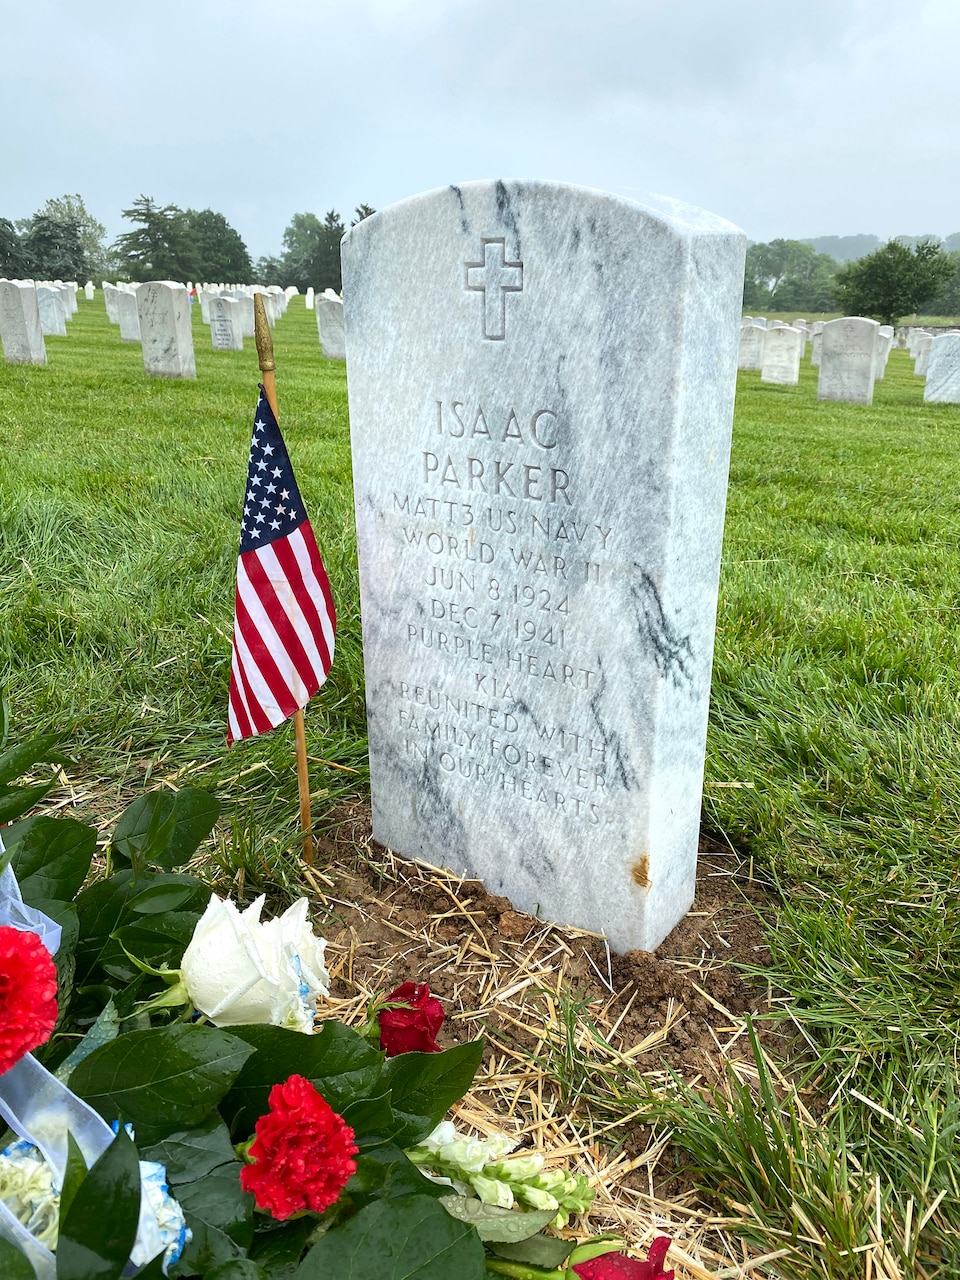 A marble headstone marks the final resting place of Navy Mess Attendant 3rd Class Isaac Parker at Jefferson Barracks National Cemetery in St. Louis, MO. Parker was killed aboard the USS Oklahoma (BB-37) when it received up to eight torpedo hits and capsized in less than 12 minutes during the attack on Pearl Harbor, HI, December 7, 1941. His remains were positively identified by the Defense POW/MIA Accounting Agency in 2020 and he was reunited with his father, mother and six other relatives also buried at the cemetery on June 8, 2021, 79 years after his death. (U.S. Navy photo by Commander Kris Hooper)